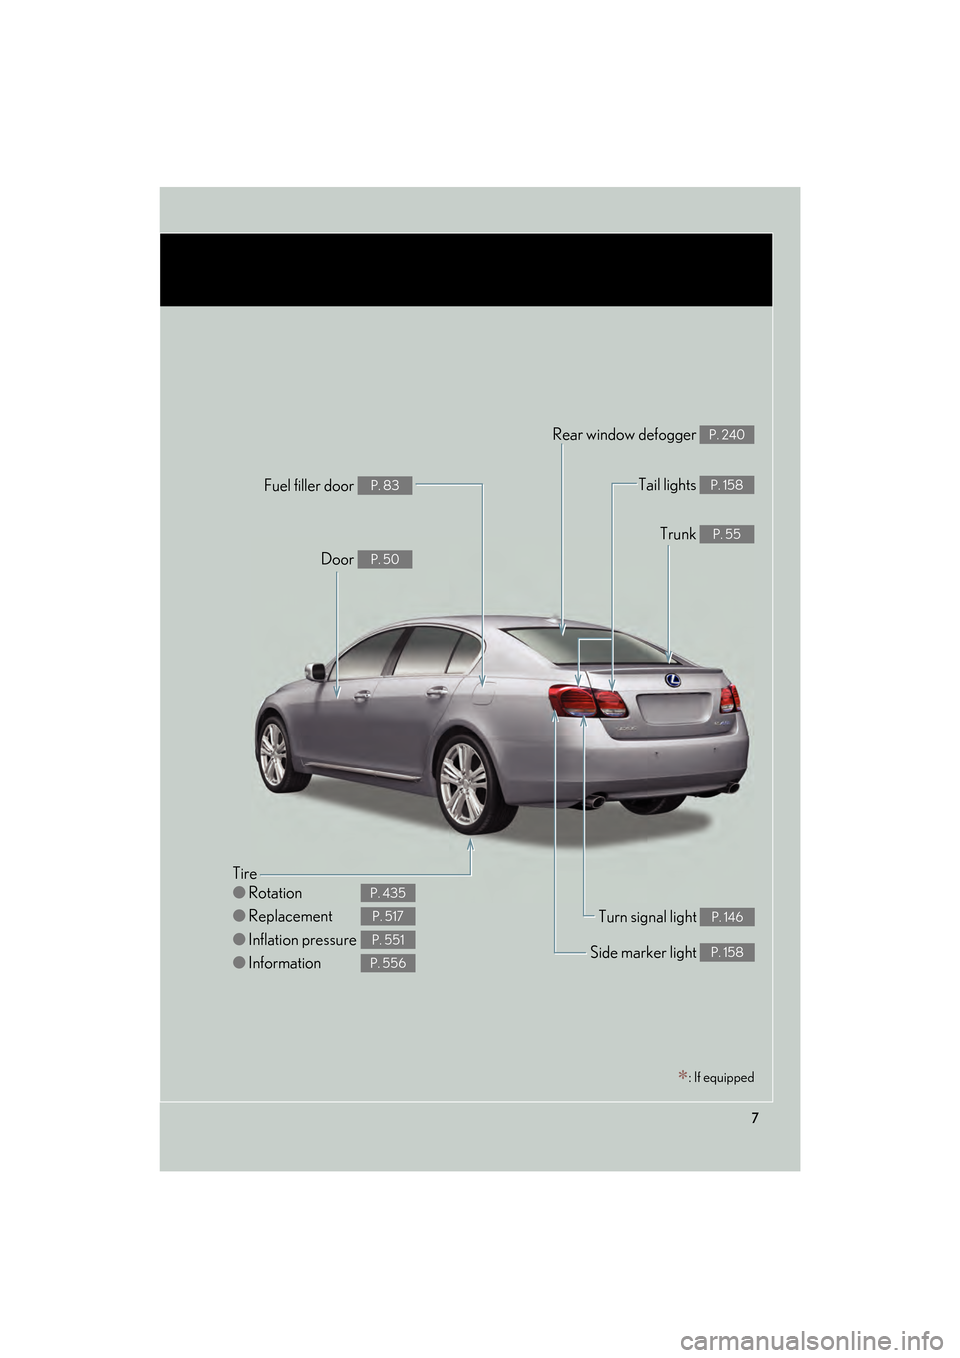 Lexus GS450h 2008  Owners Manual 7
GS_HV_U
June 19, 2008 1:15 pm
Tire
●Rotation
● Replacement
● Inflation pressure
● Information
P. 435
P. 517
P. 551
P. 556
Tail lights P. 158
Side marker light P. 158
Trunk P. 55
Rear window 